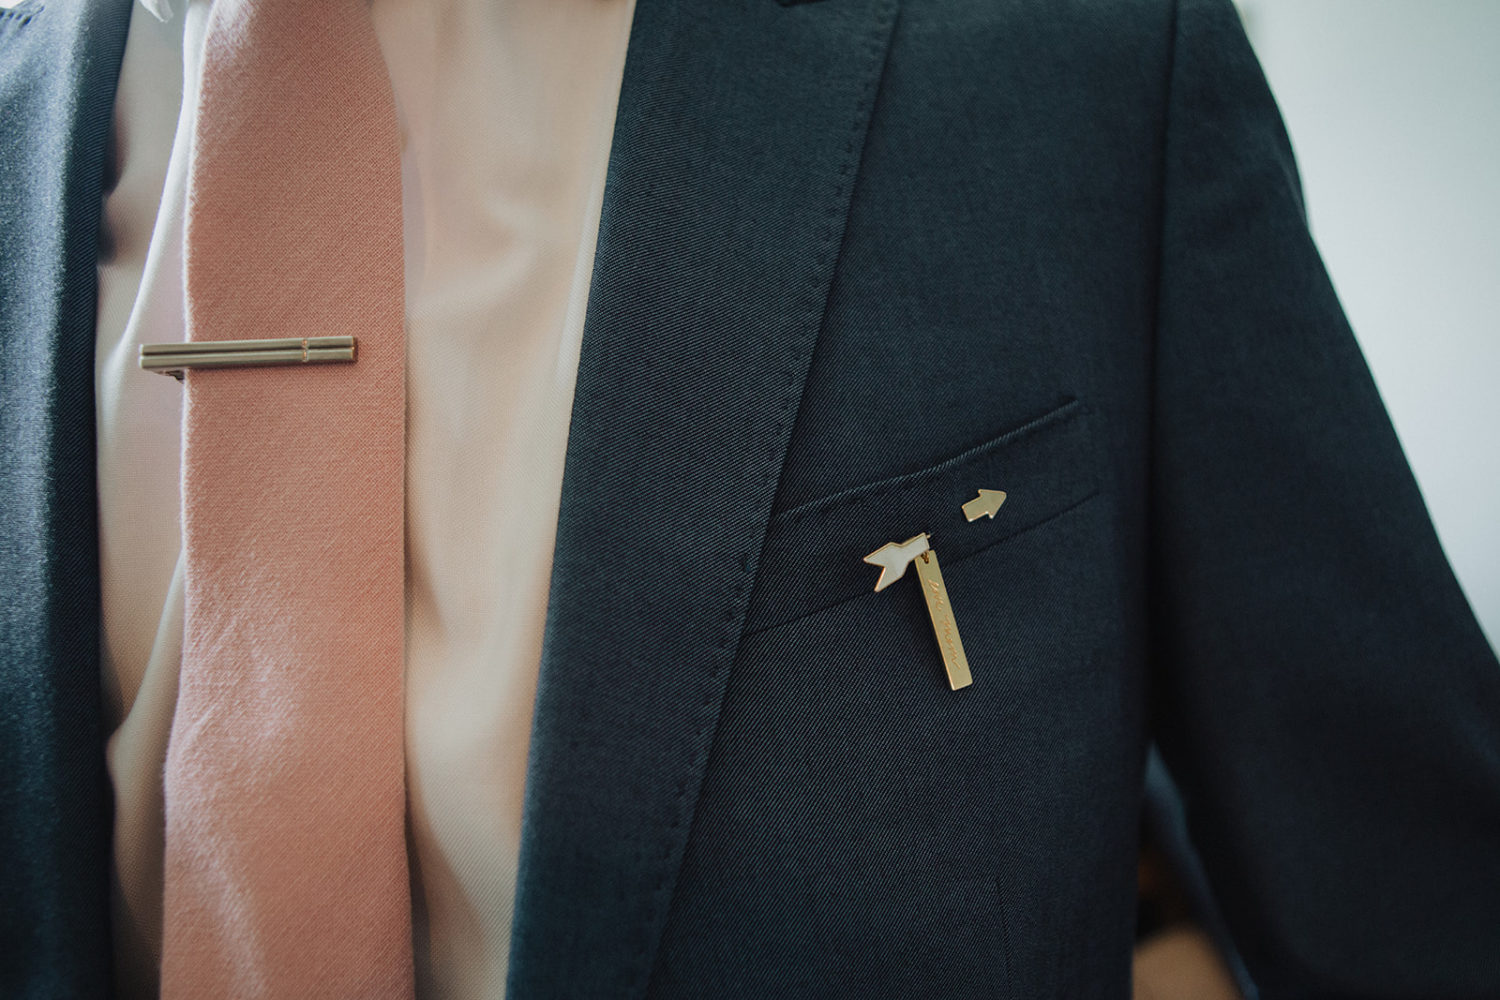 Groom's tie pin on tie and personalized pin on suit jacket 